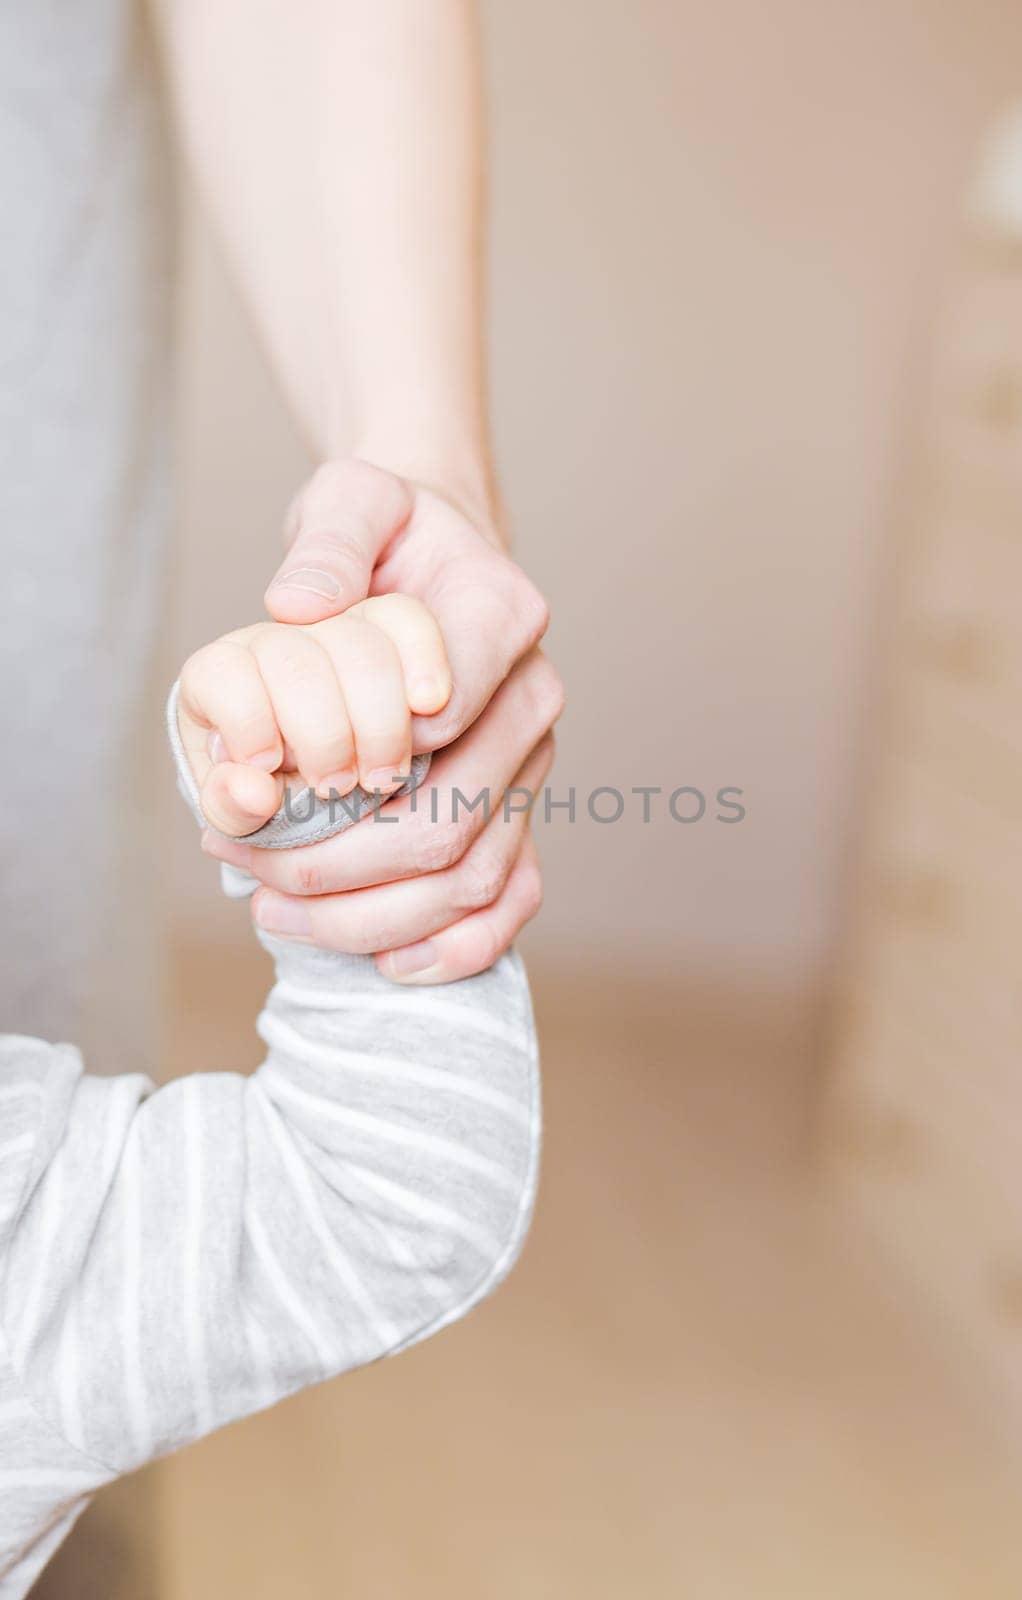 Concept of love and family. hands of mother and baby closeup.